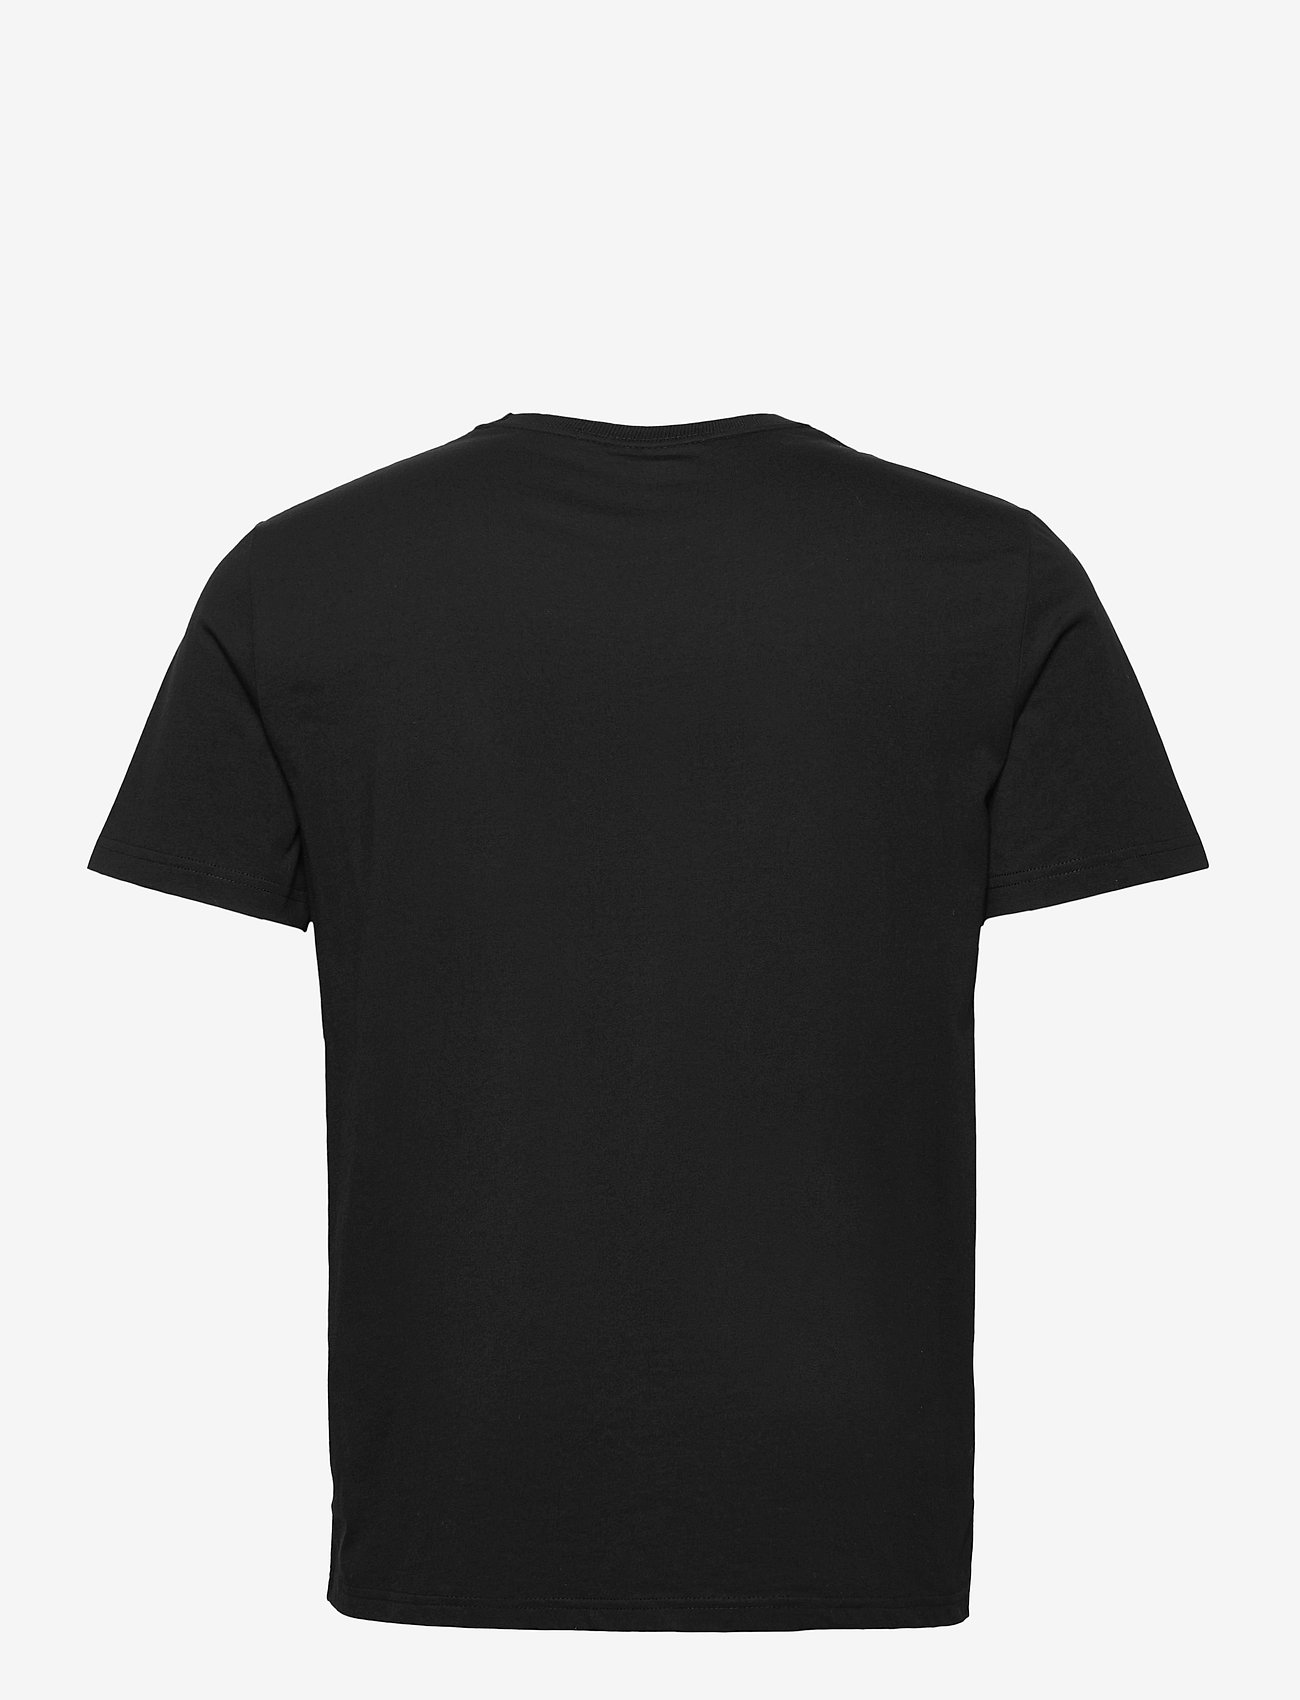 Fred Perry - CREW NECK T-SHIRT - basis-t-skjorter - black - 1